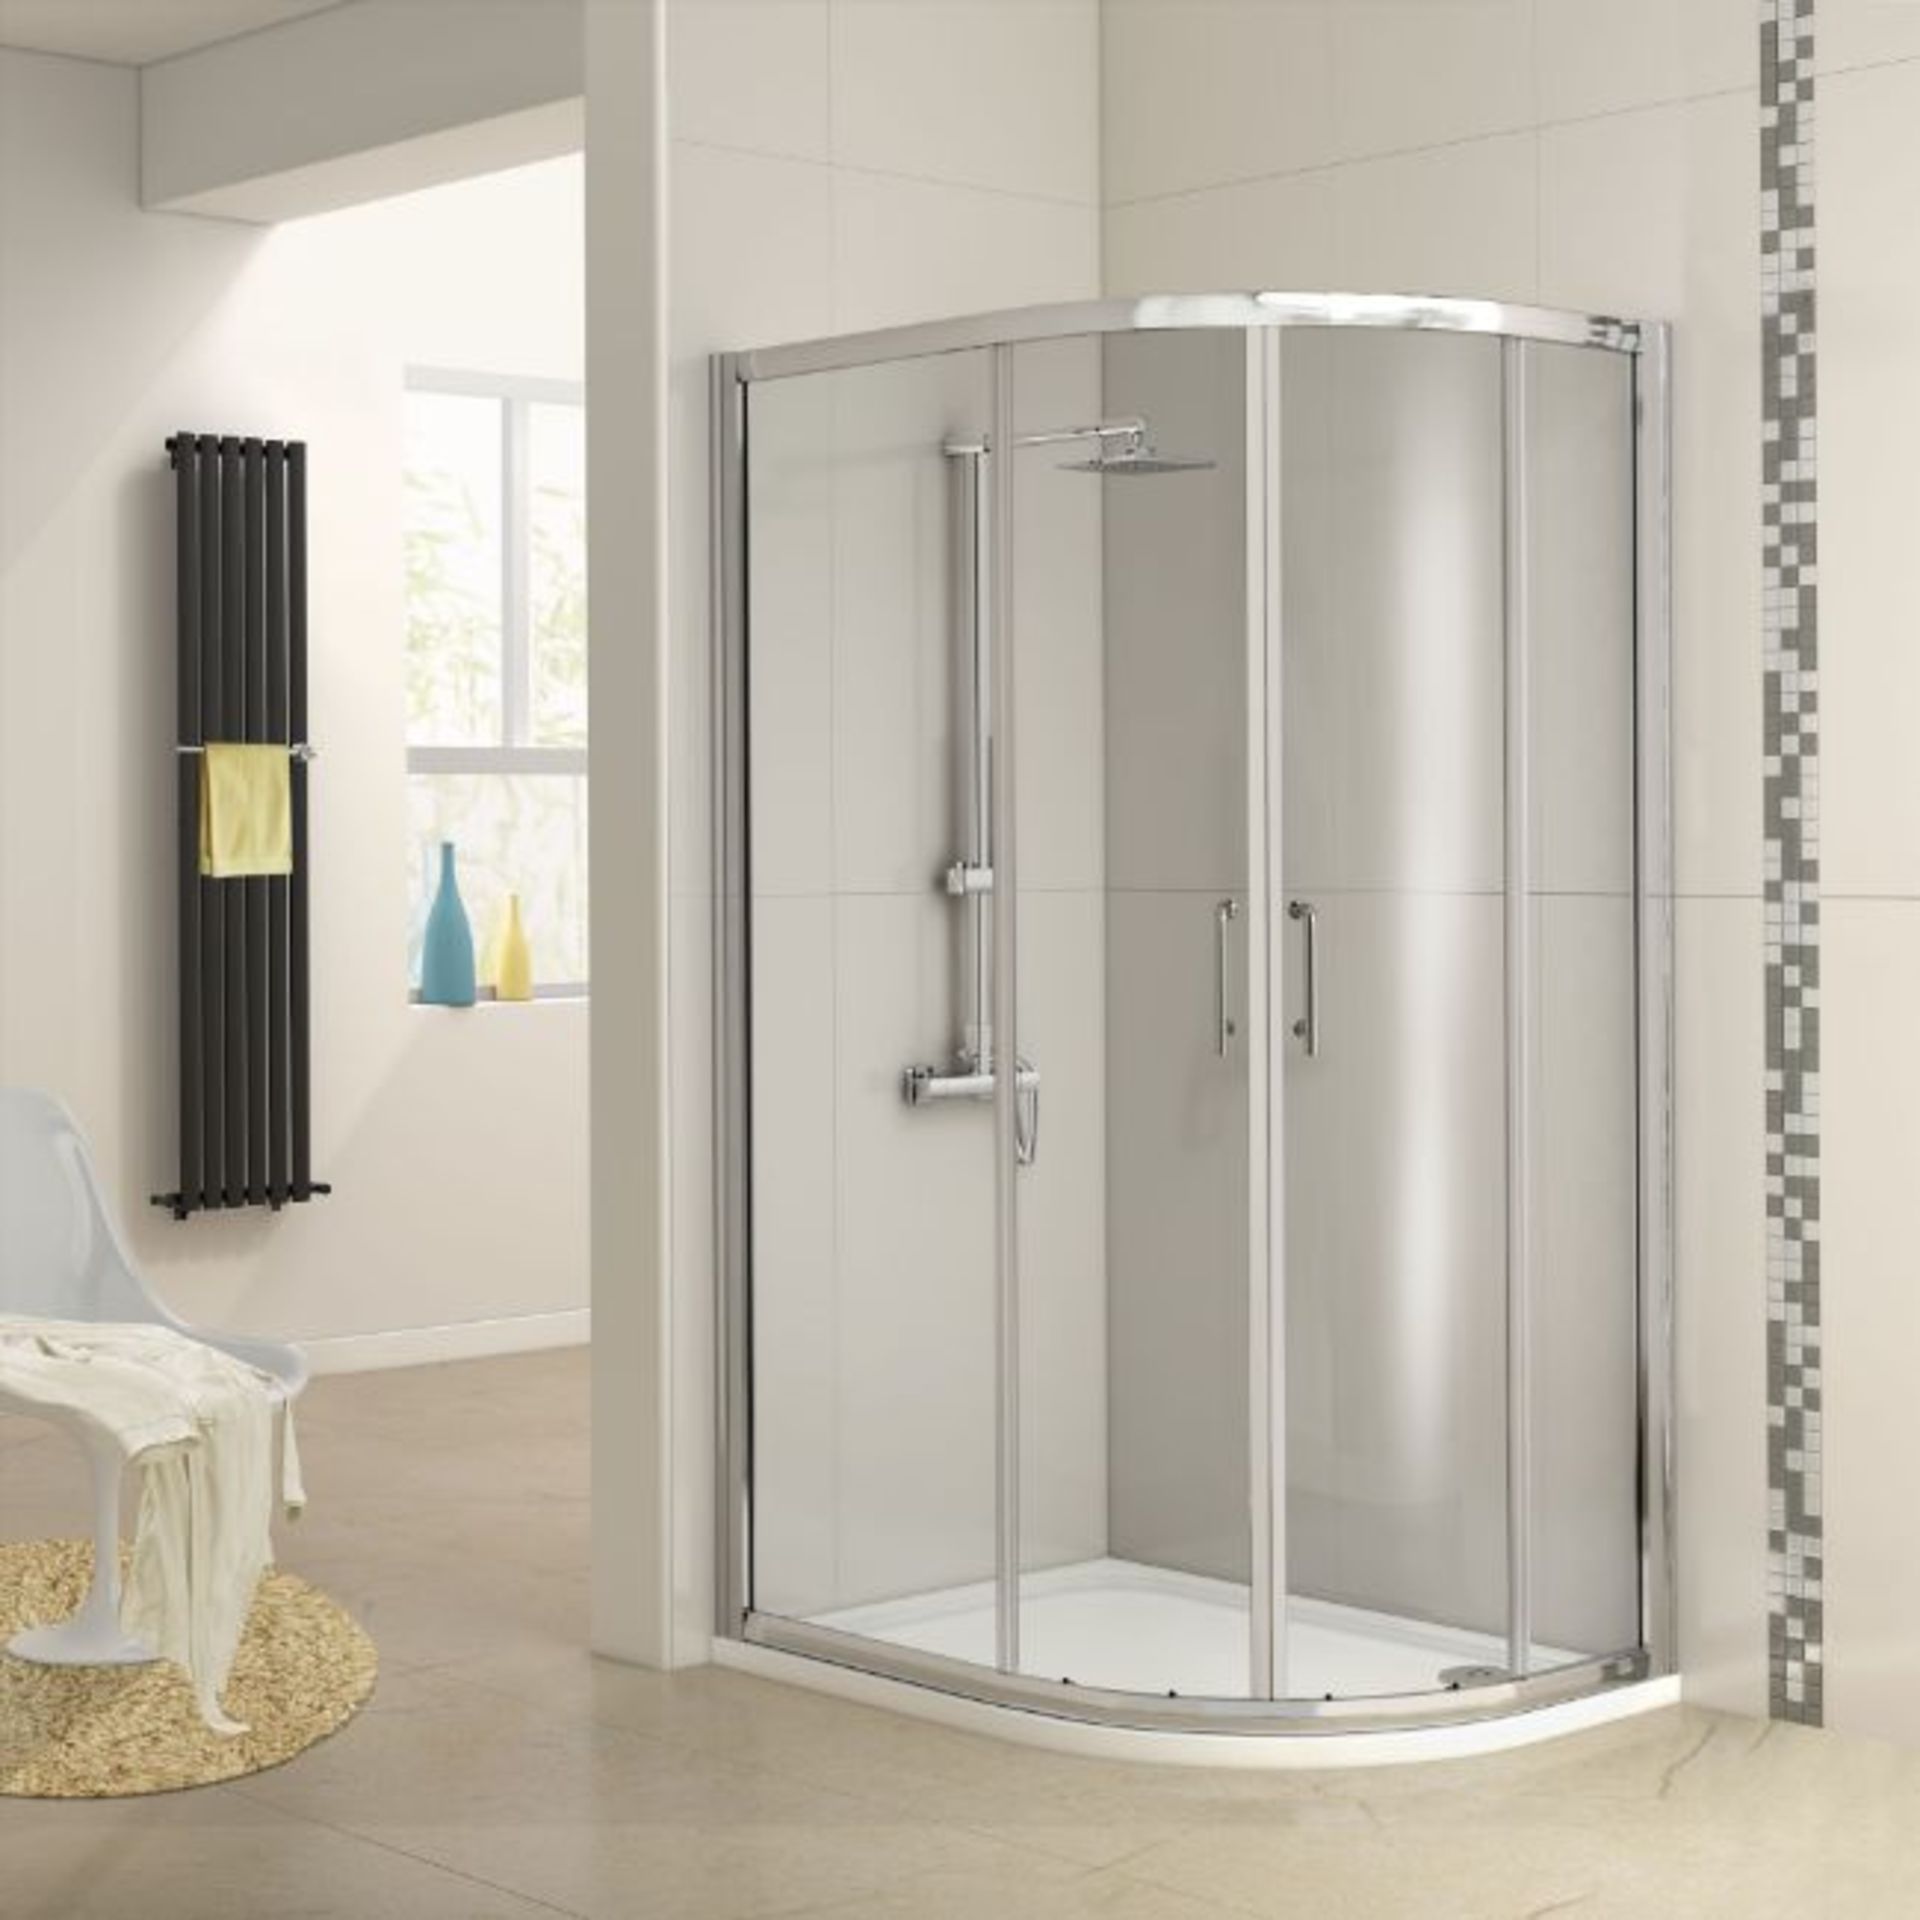 New Twyfords 1200x900mm - 6mm - Offset 2 Door Quadrant Shower Enclosure. RRP £599.99..Make The... - Image 2 of 2